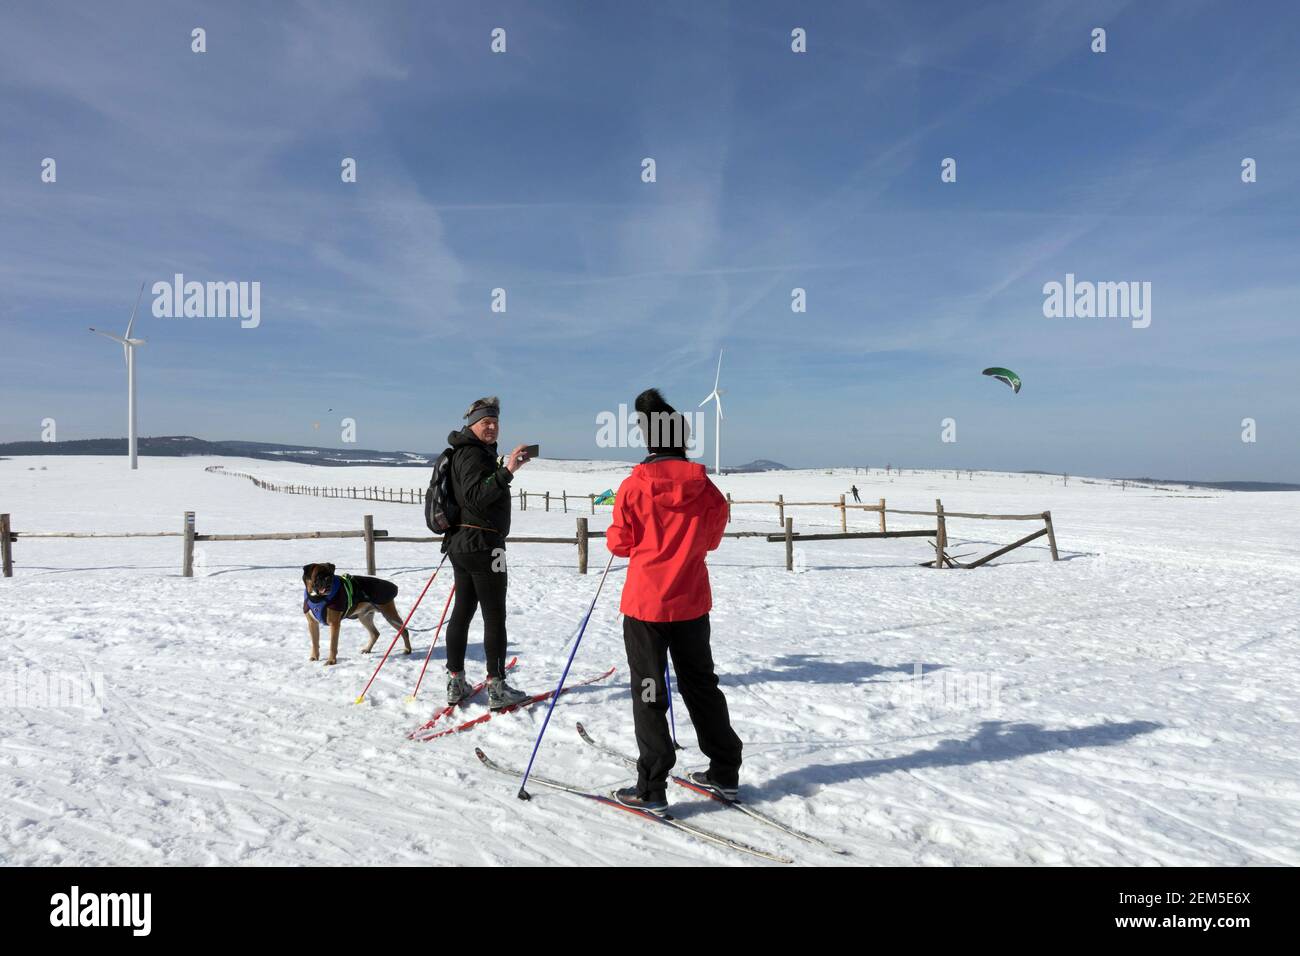 Winter sports lifestyle, senior couple skiers, man woman dog on cross-country ski trail in snowy landscape Stock Photo